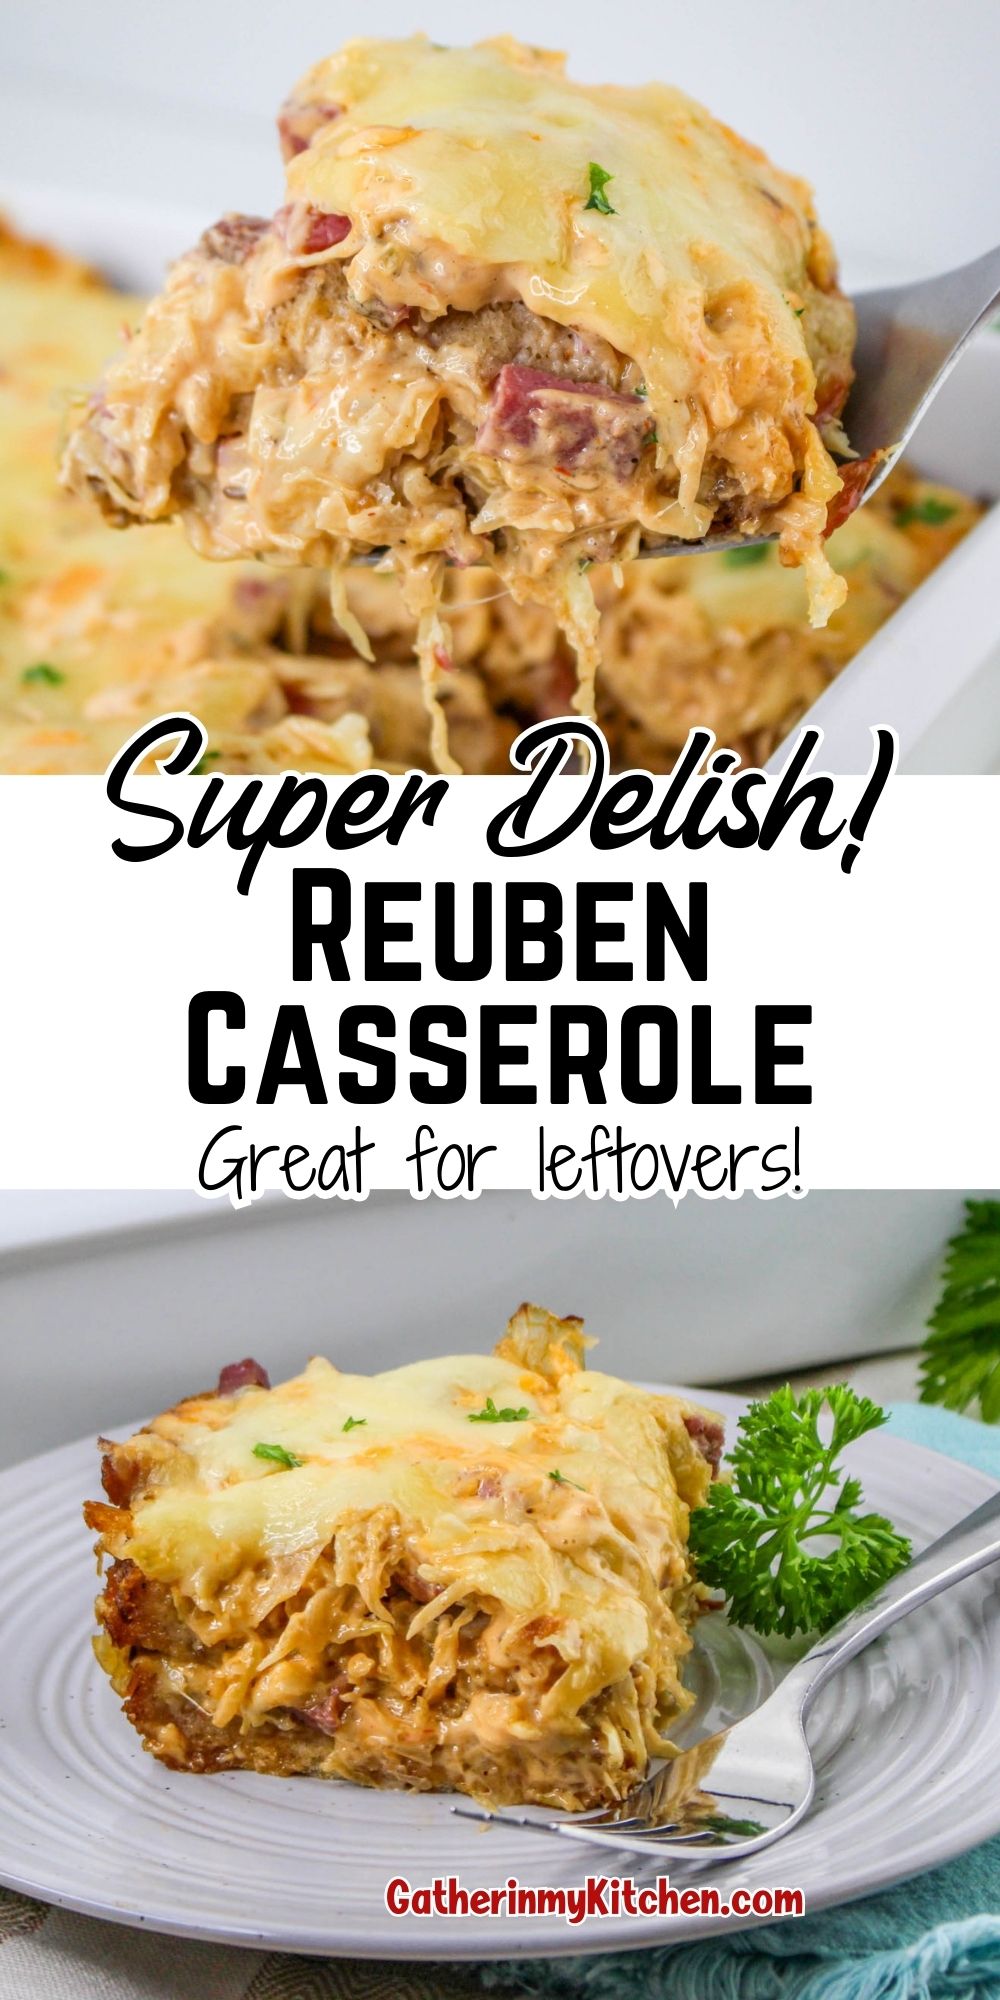 Pin image: Top and bottom pics of Reuben casserole, middle says "Super Delish Reuben Casserole: Great for leftovers!".